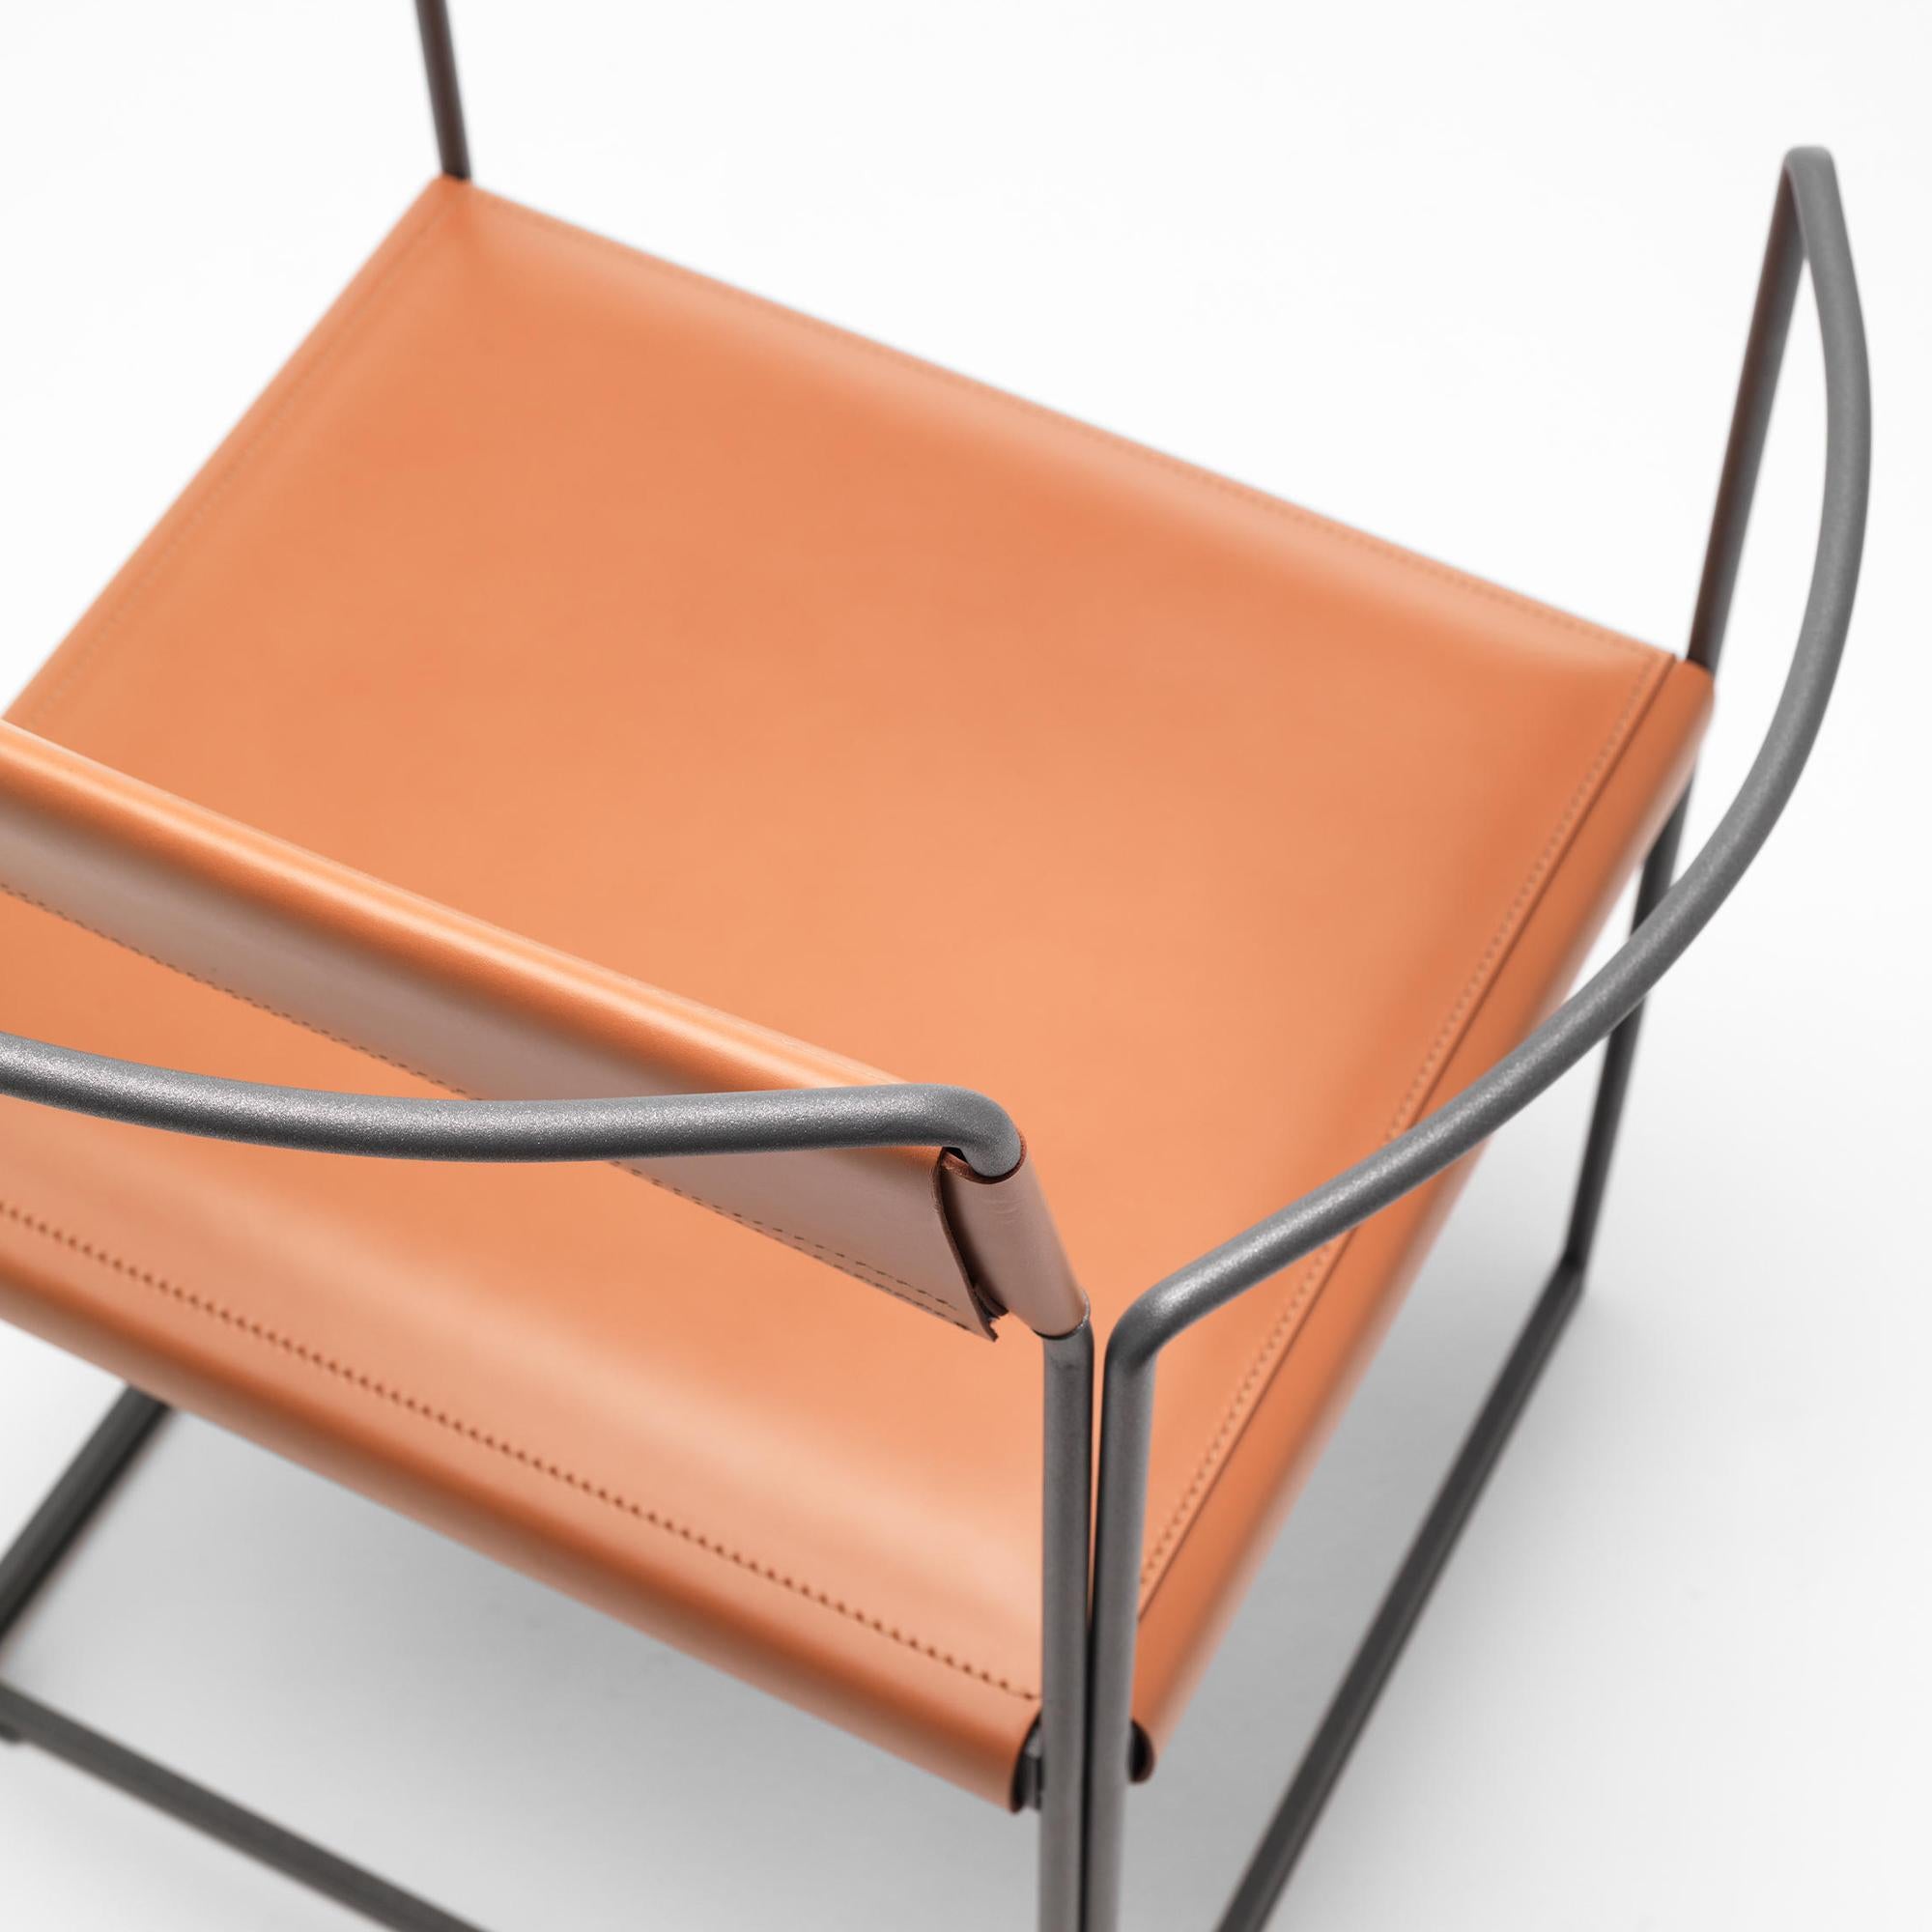 Italian 21st Century Modern Chair With Painted Steel Structure And Hide Leather Seat For Sale